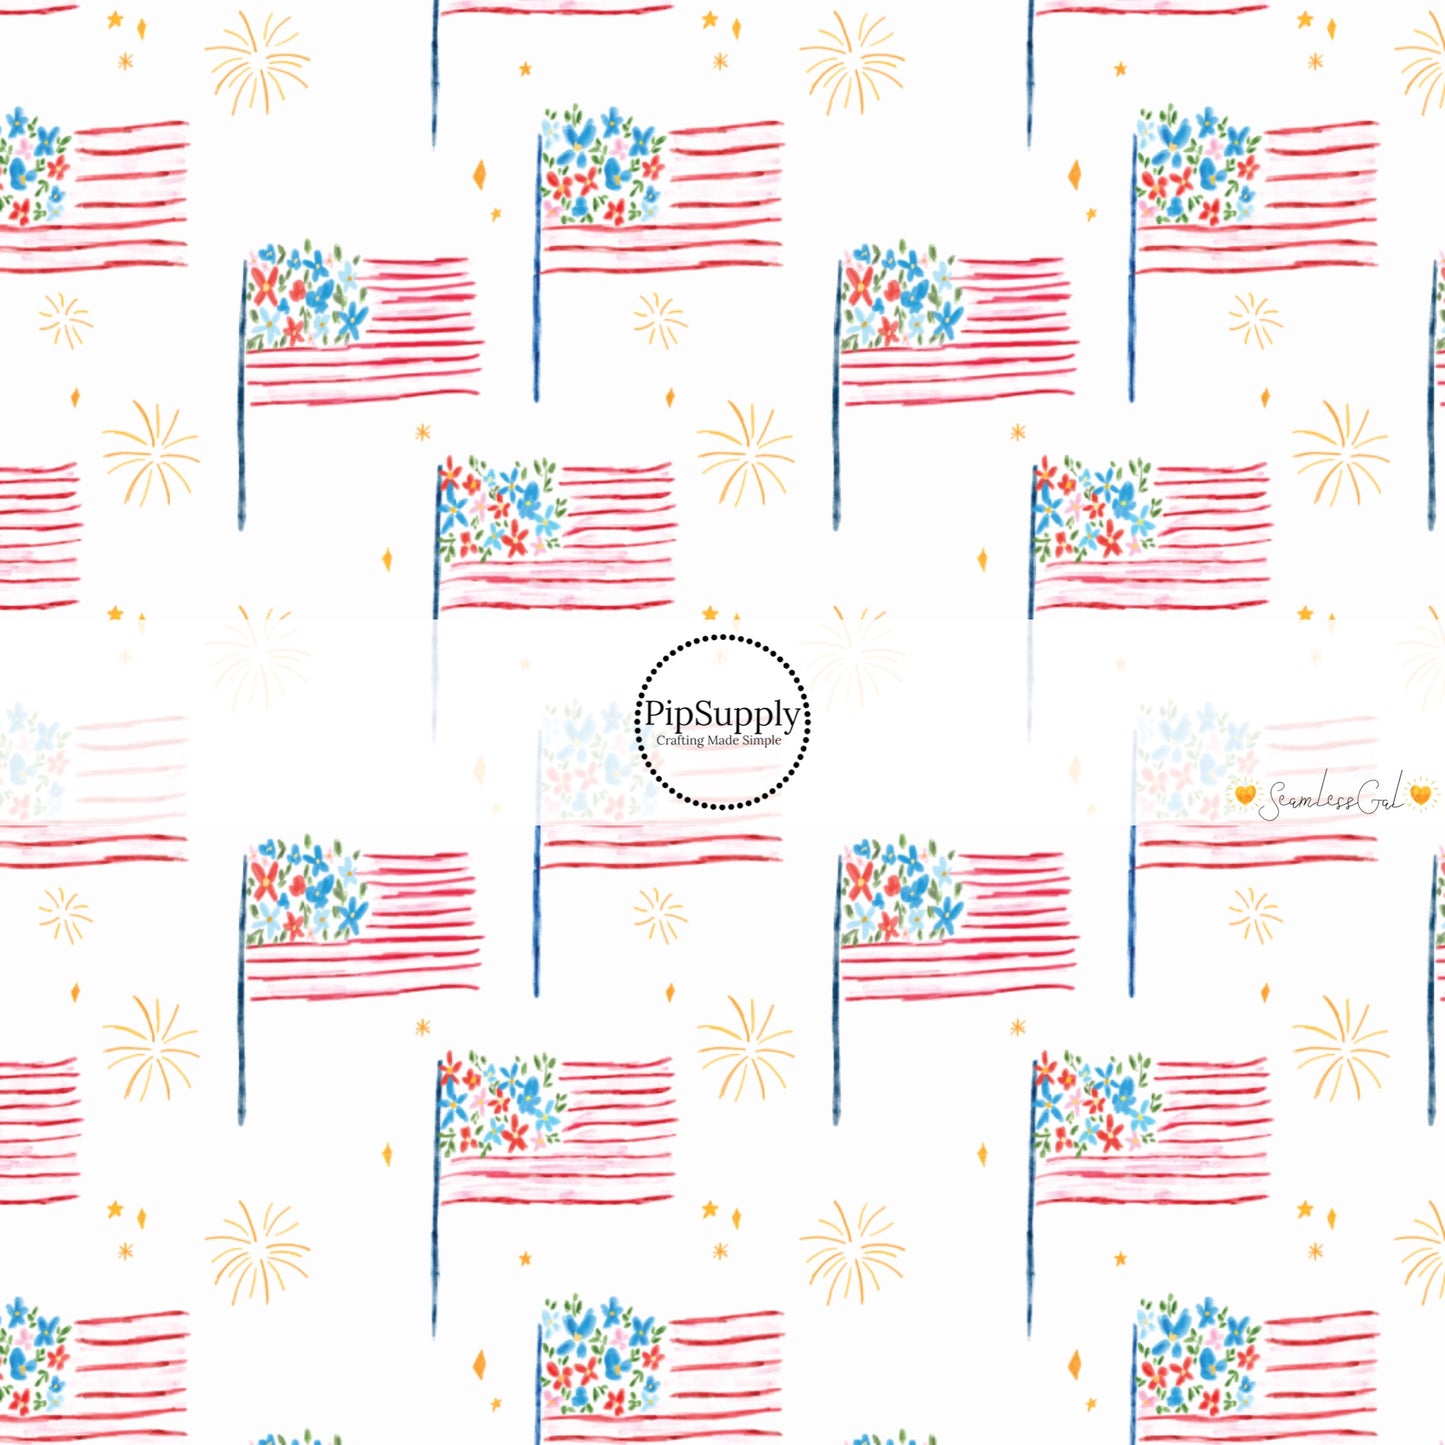 This 4th of July fabric by the yard features patterned American flags on cream. This fun patriotic themed fabric can be used for all your sewing and crafting needs!